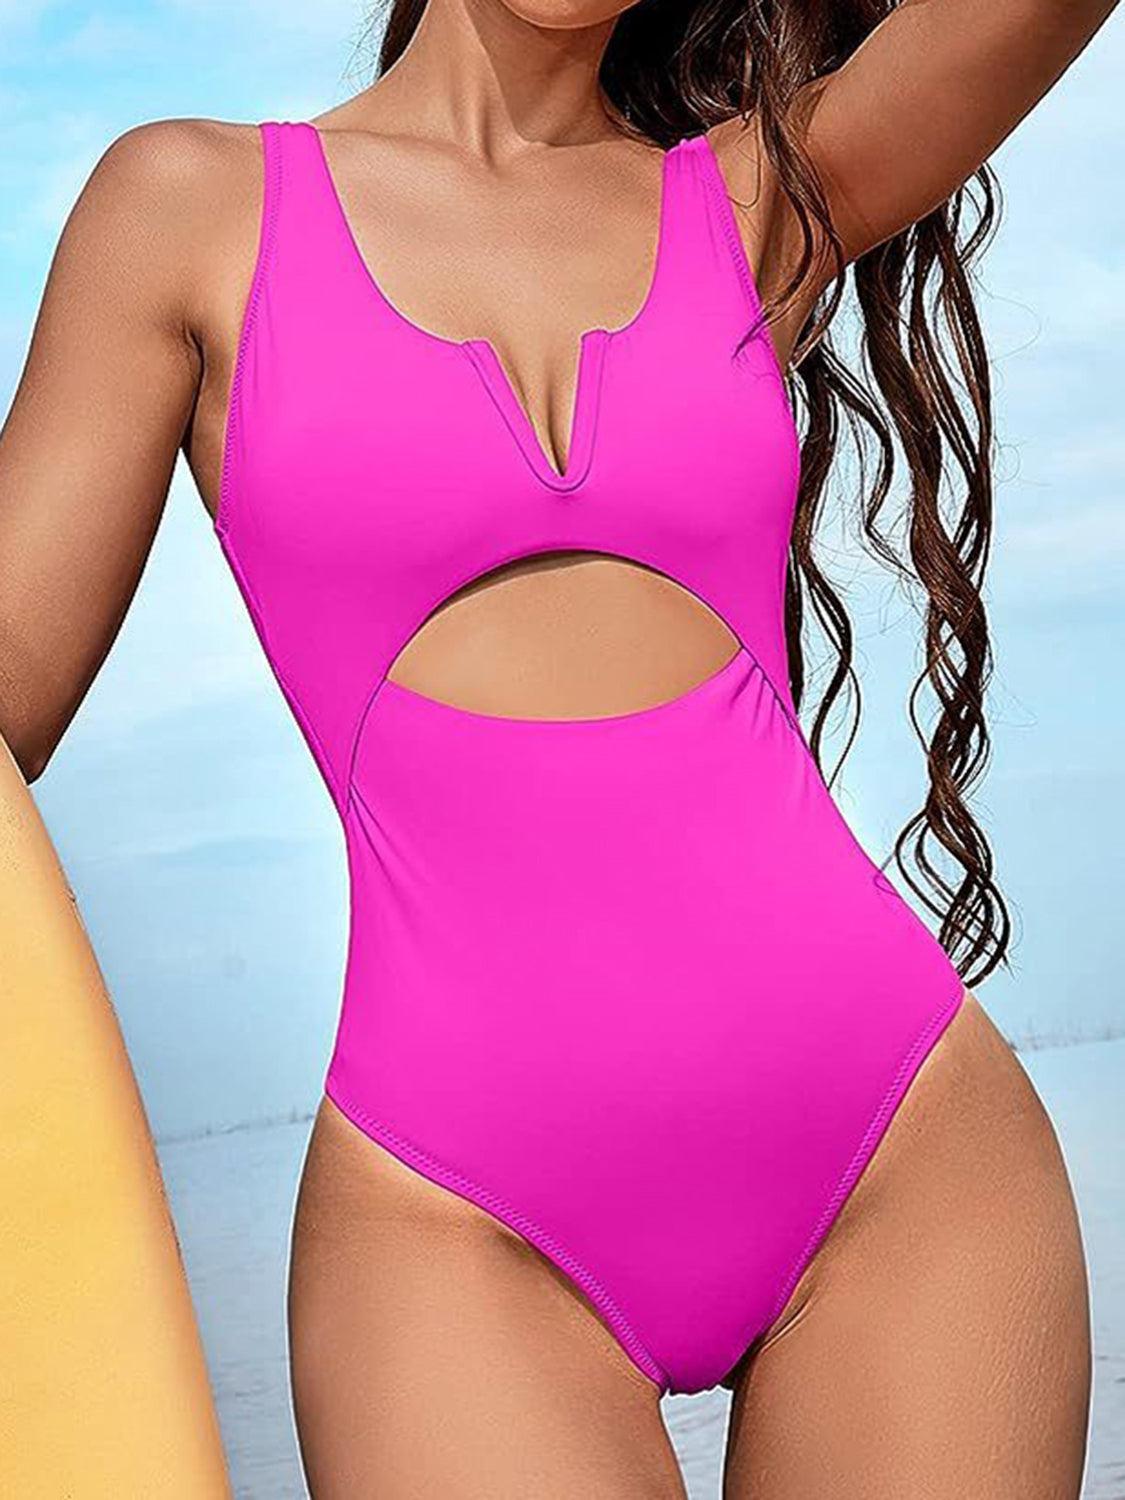 a woman in a pink one piece swimsuit holding a surfboard